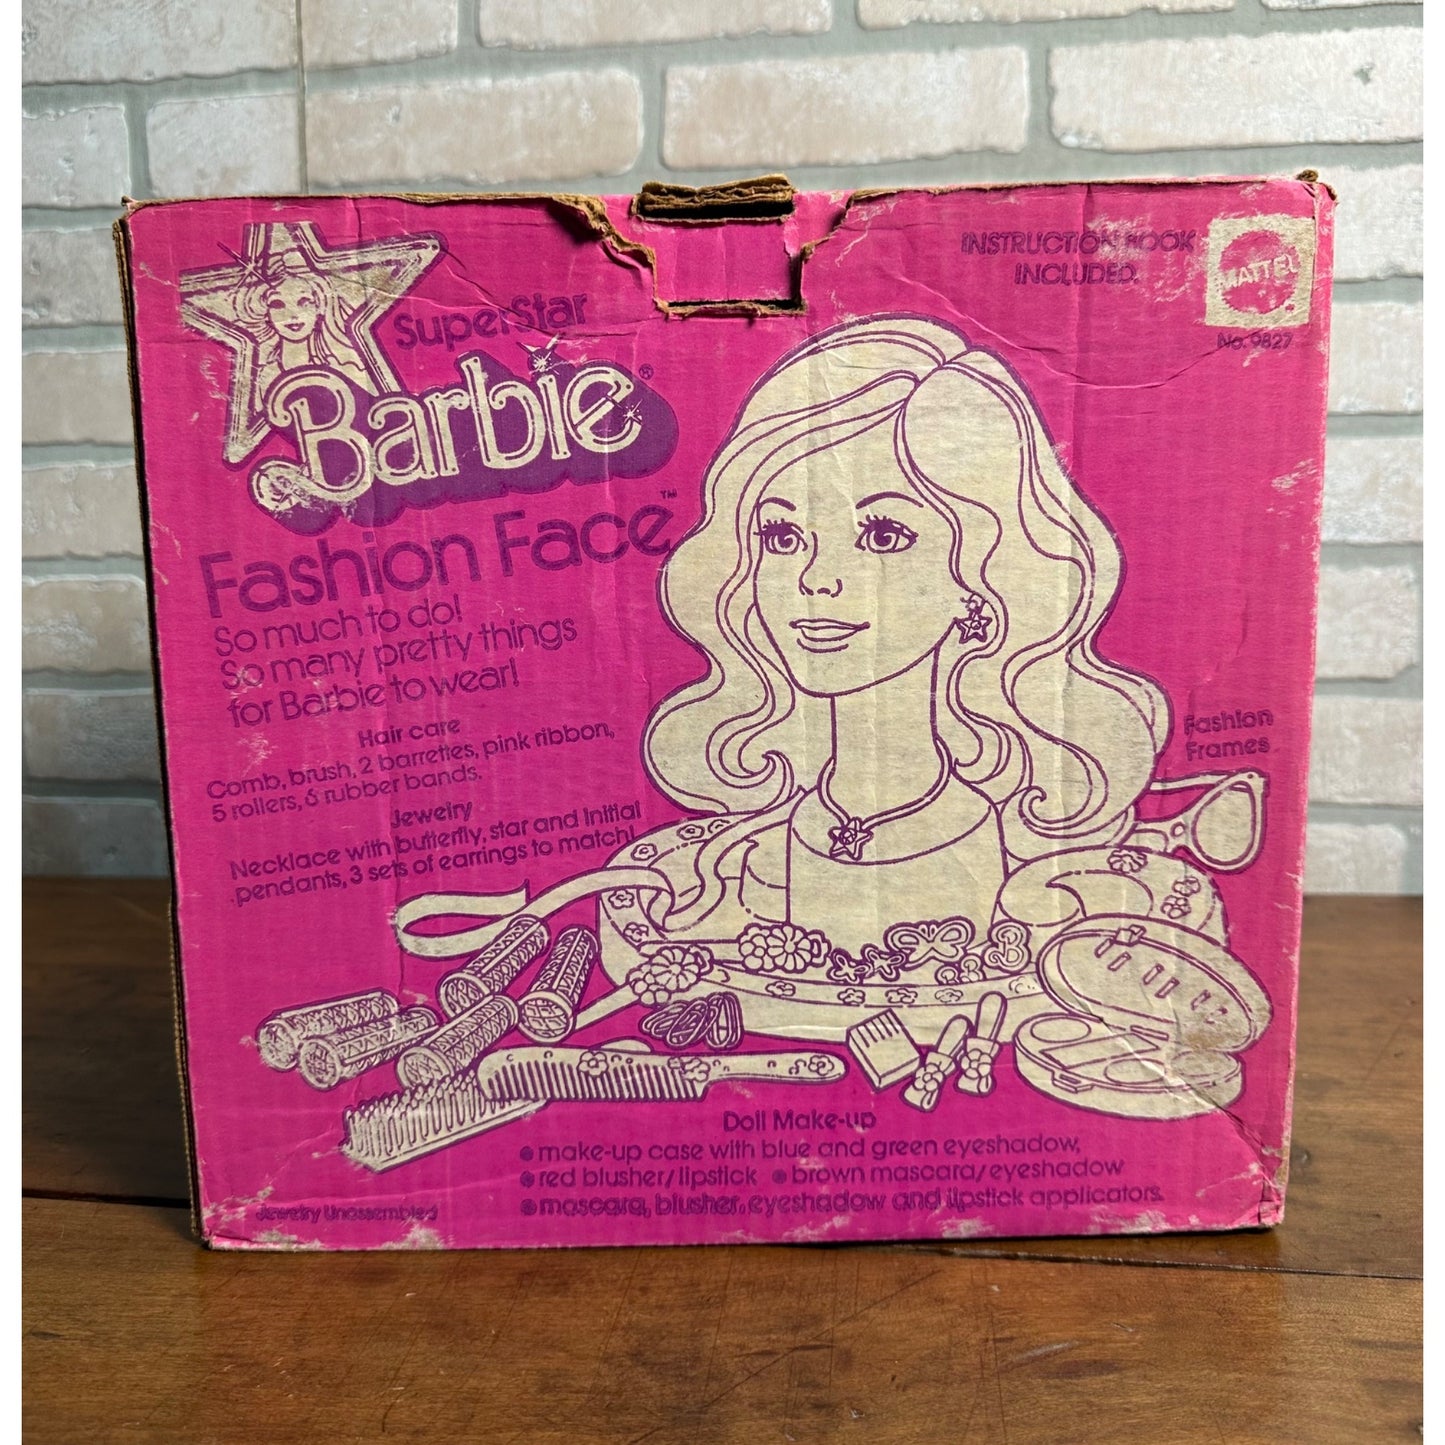 VINTAGE 1976 BARBIE SUPERSTAR FASHION FACE BEAUTY CENTER MAKE-UP JEWELRY + BOX